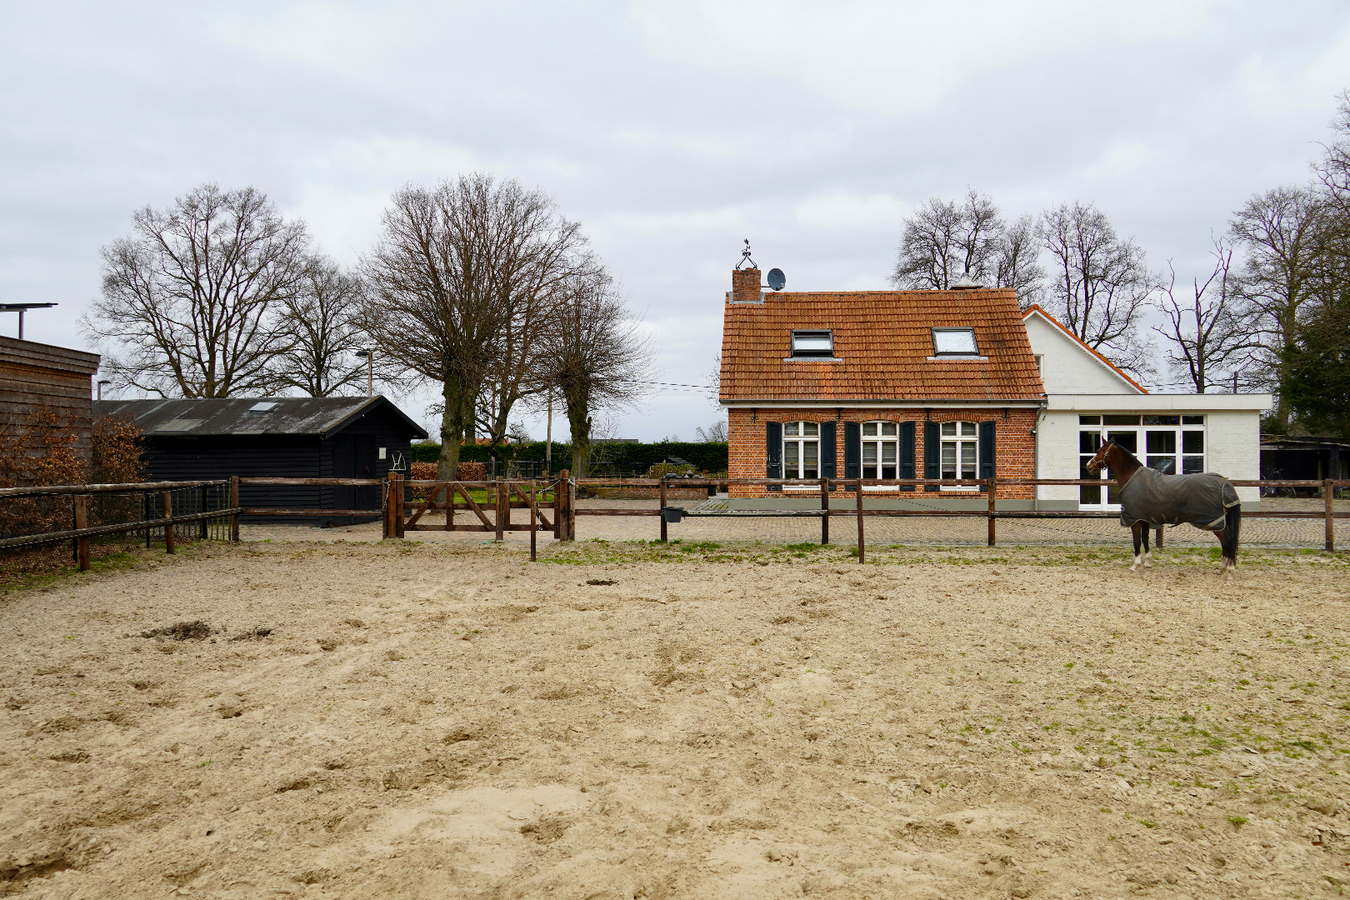 Property sold in Poppel